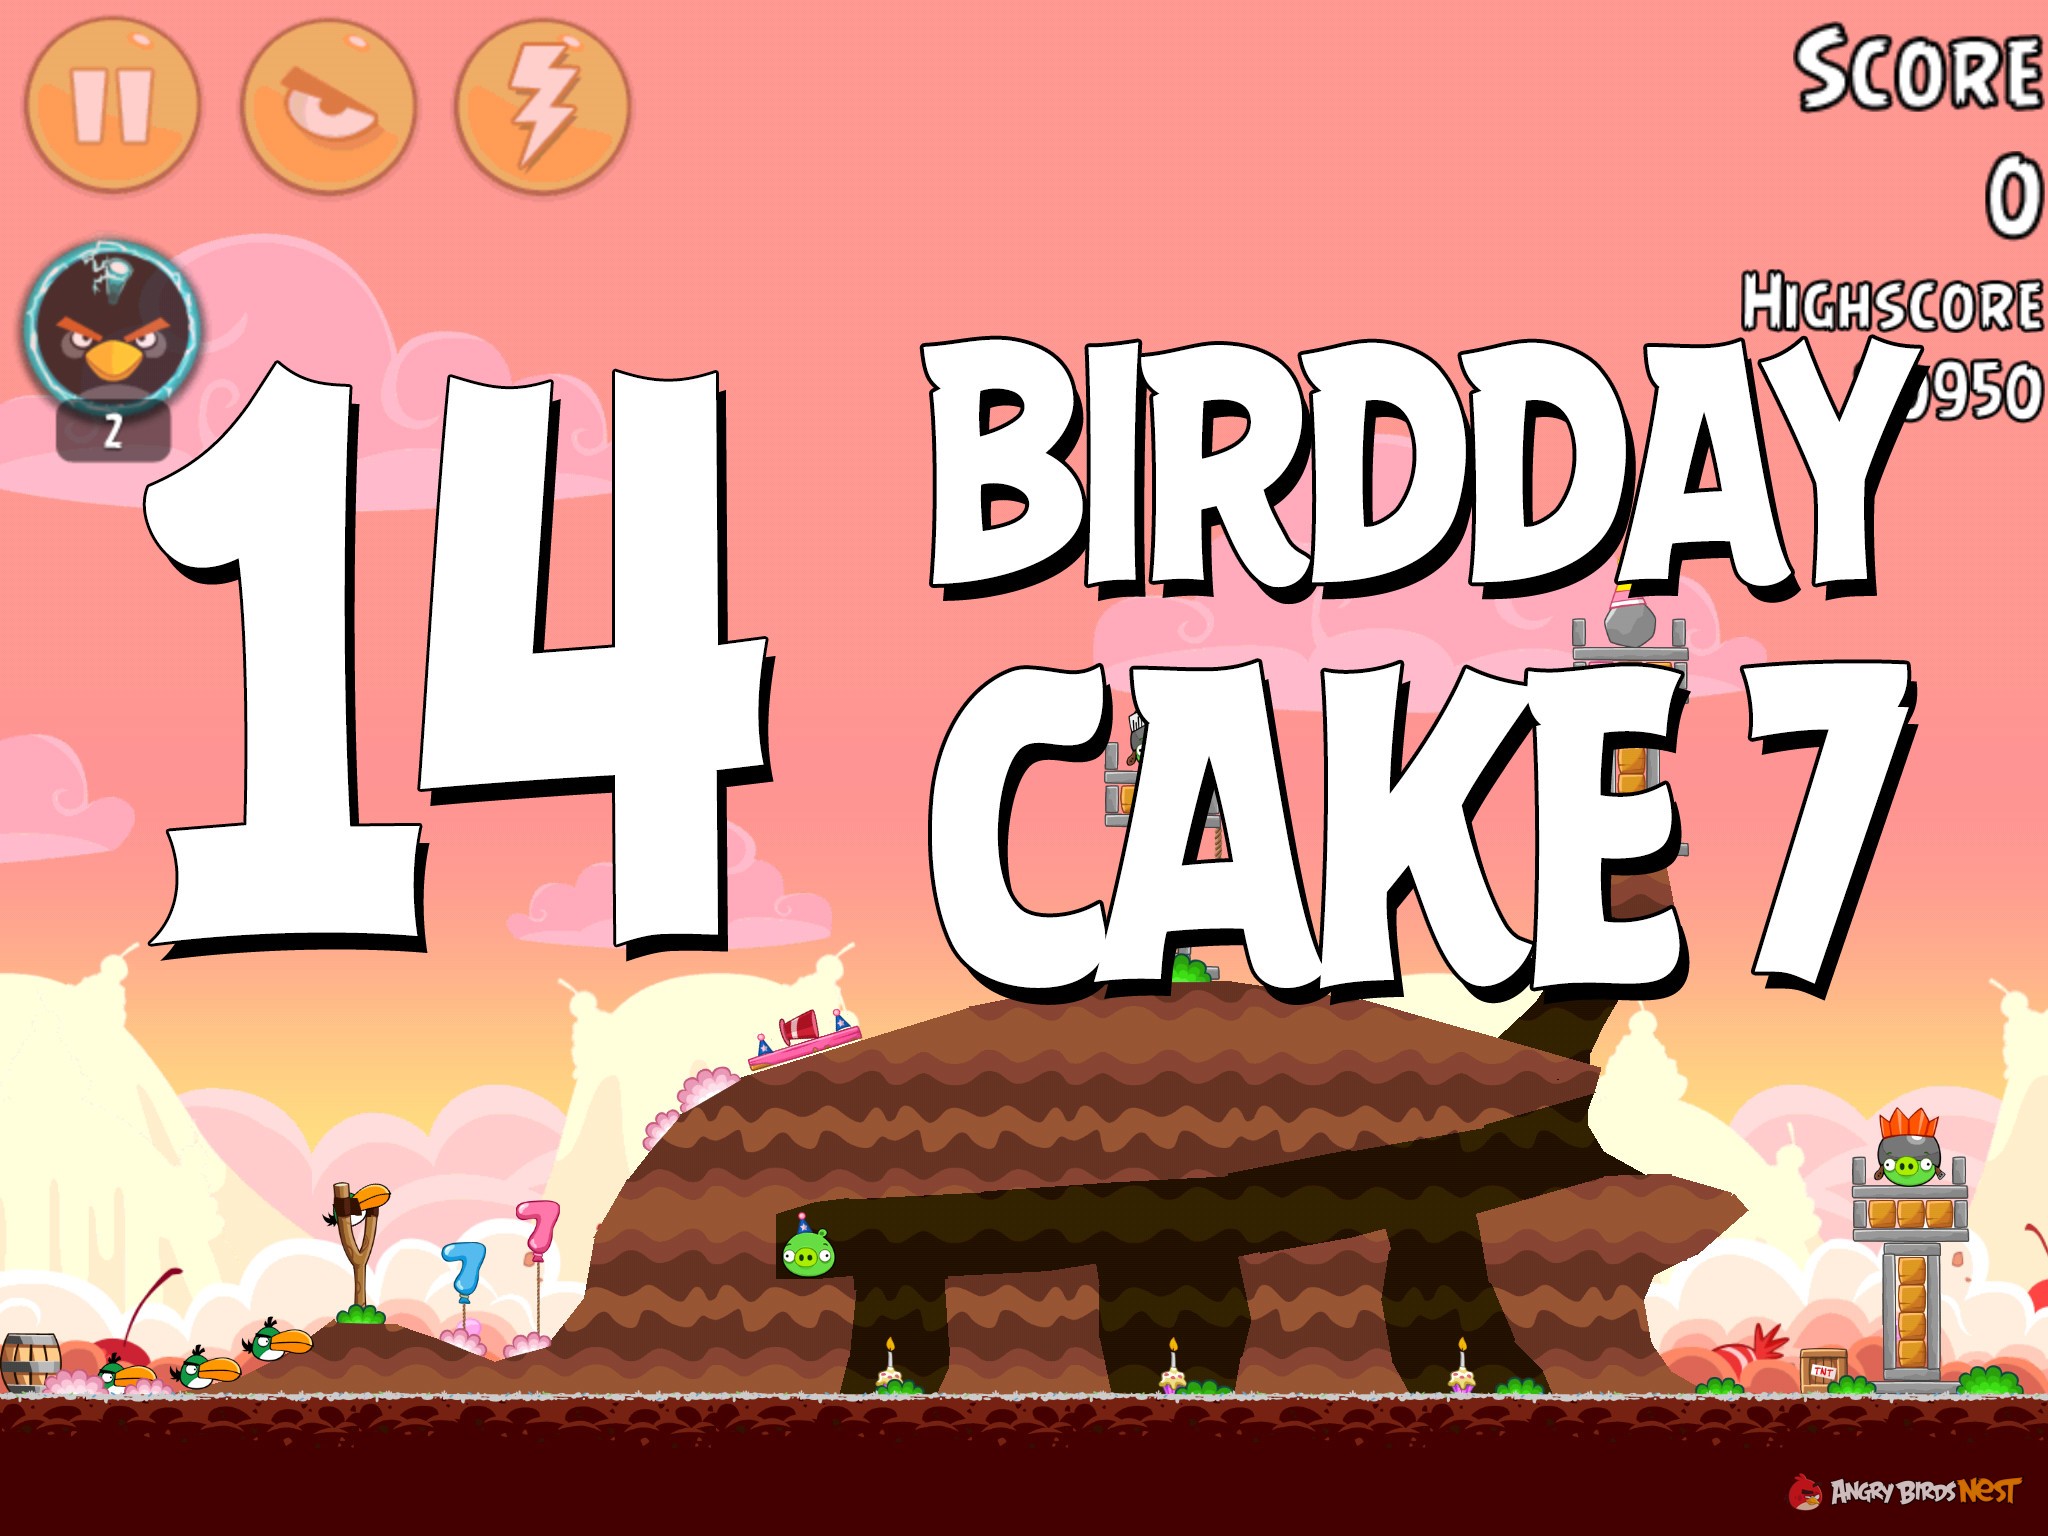 Angry-Birds-Birdday-Party-Cake-7-Level-14